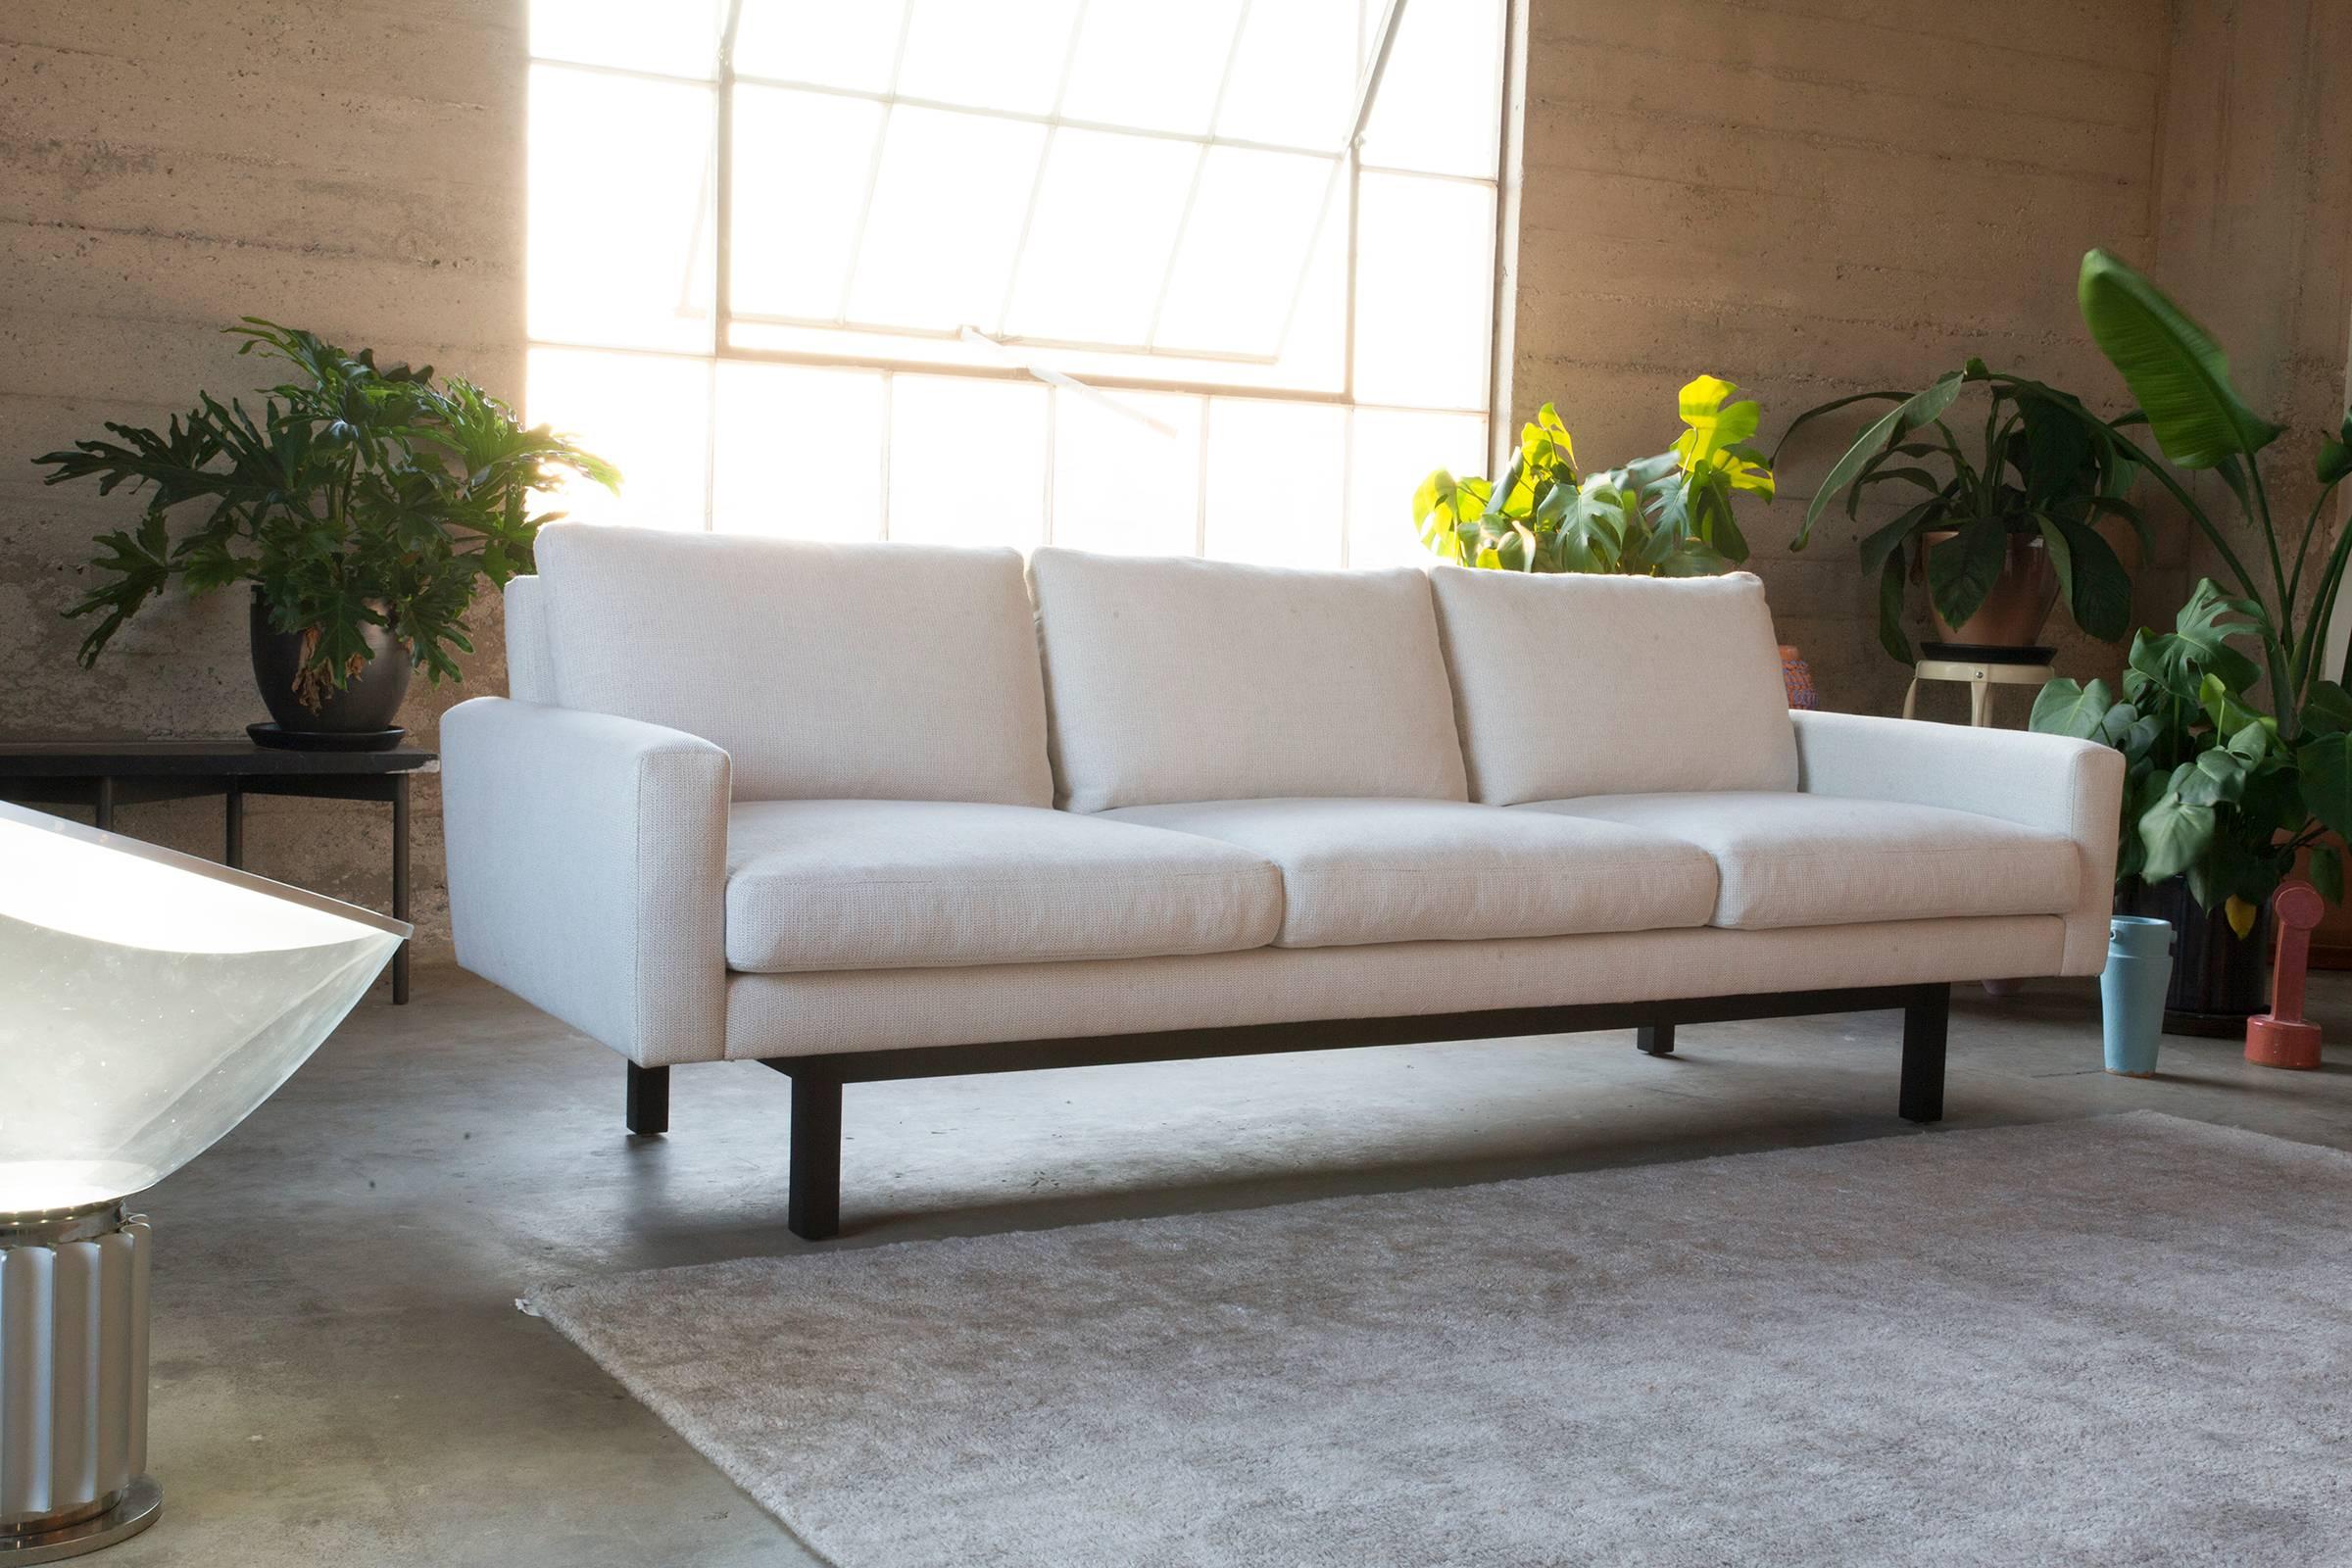 The standard sofa is deceptively simple at first glance. Upon closer inspection it manages to be both modern and nostalgic, the sofa you will bring with you from home to home for decades to come.

Upholstered in a full aniline wax leather sourced